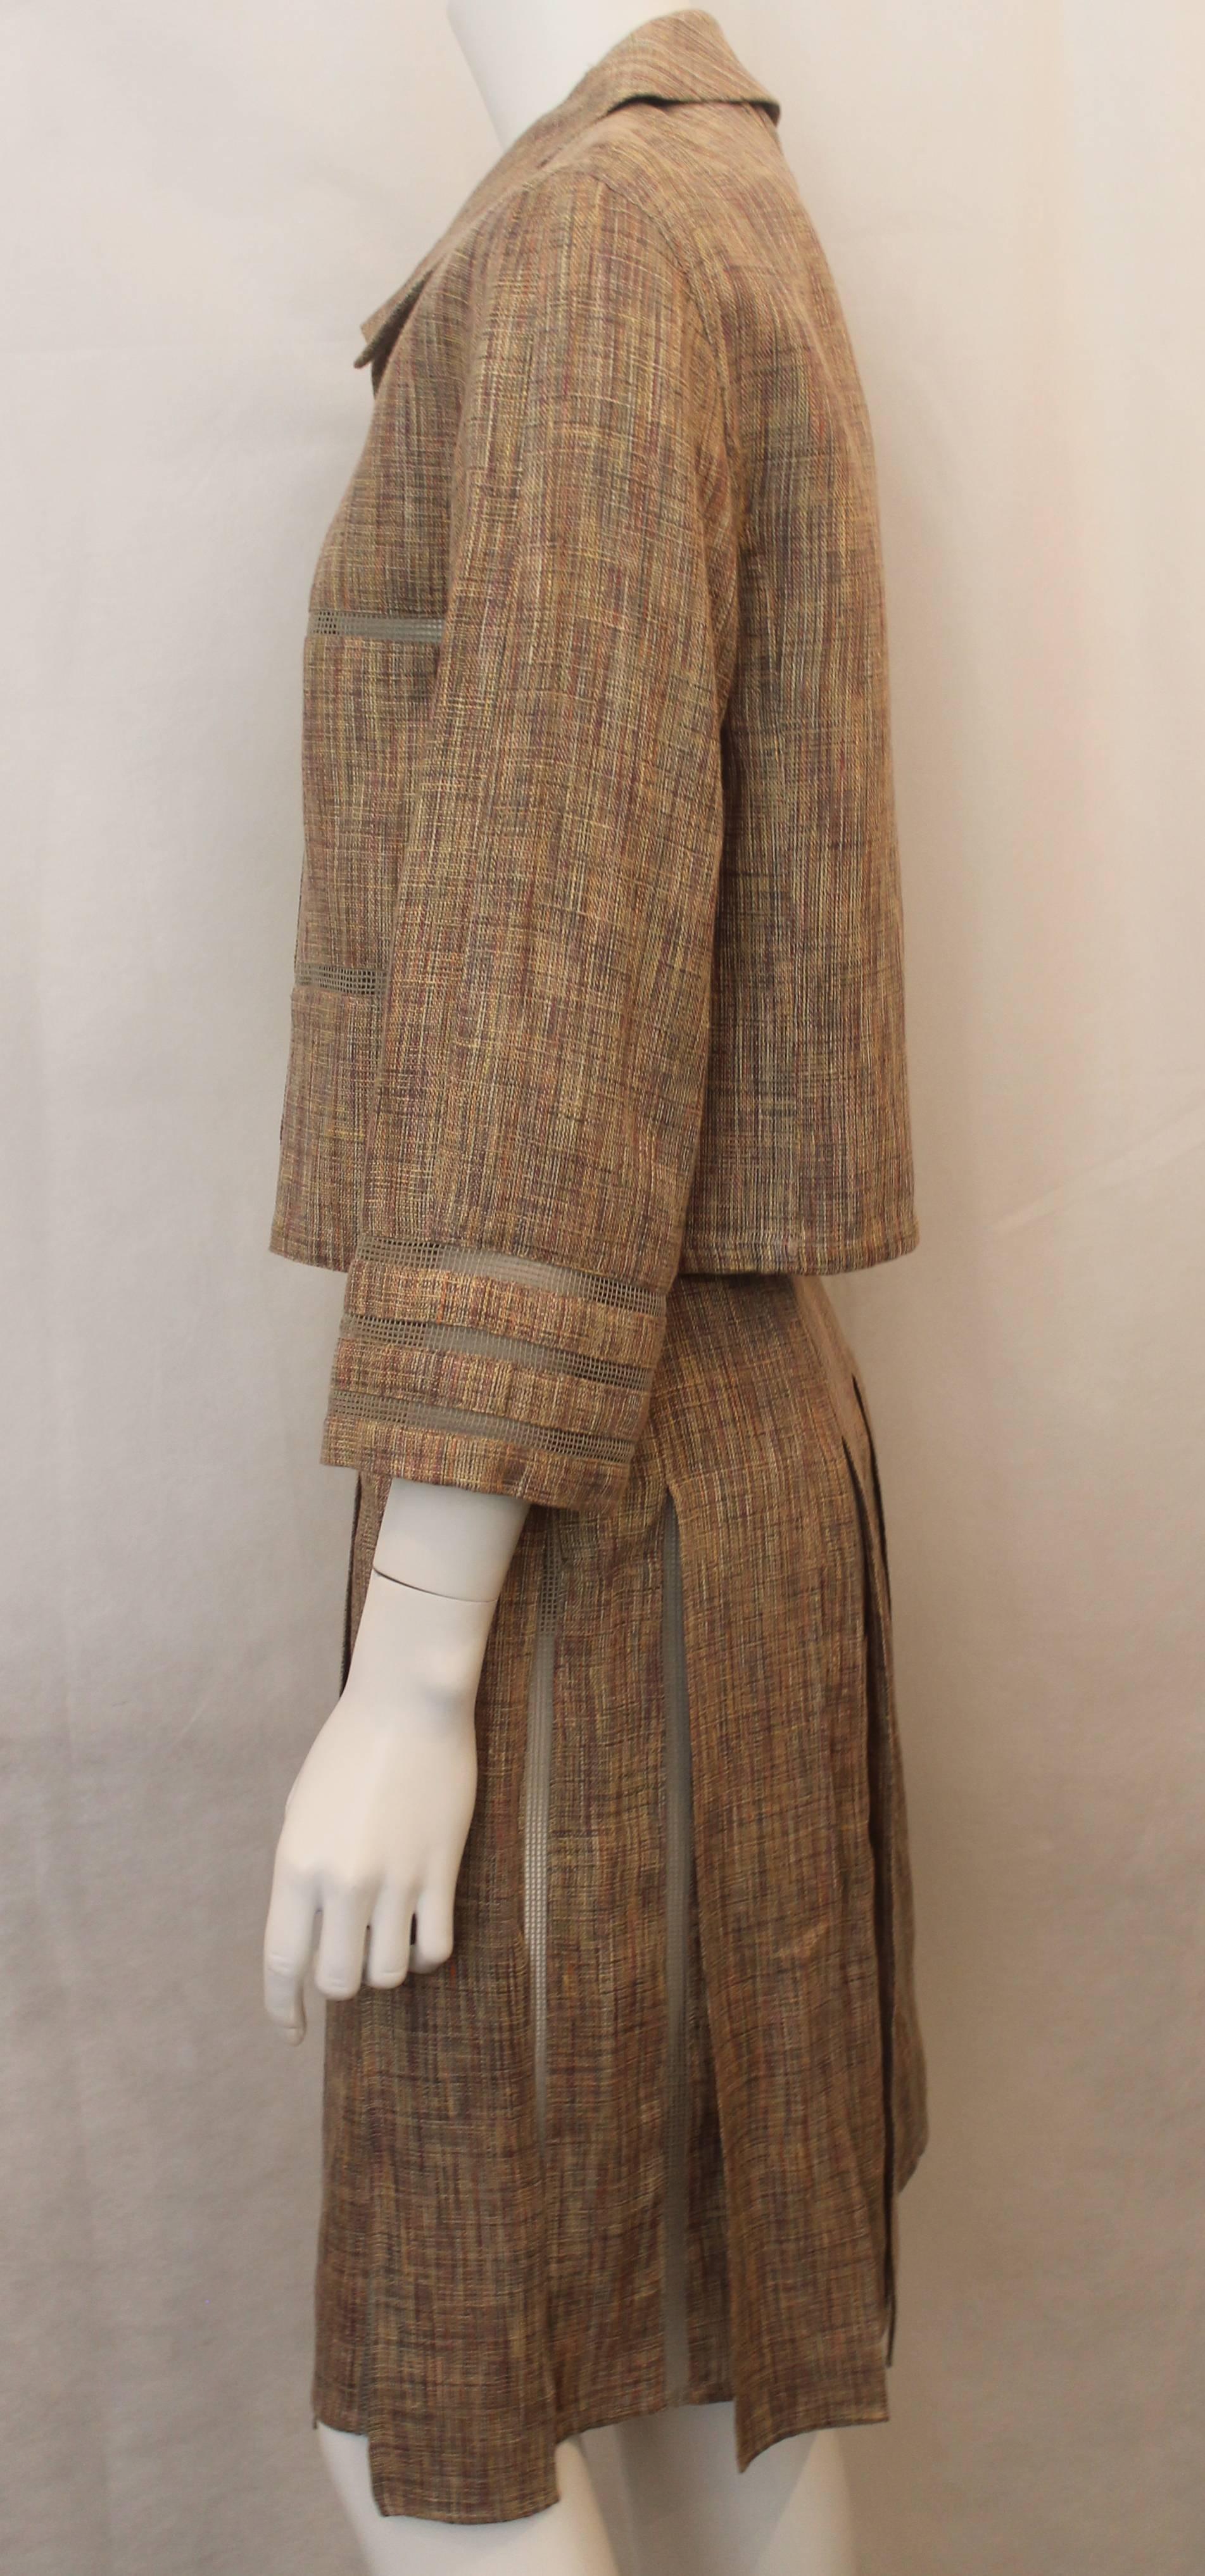 Brown Chanel Earthtone Linen Blend Skirt Suit with Mesh Detail - 38 - 99P For Sale